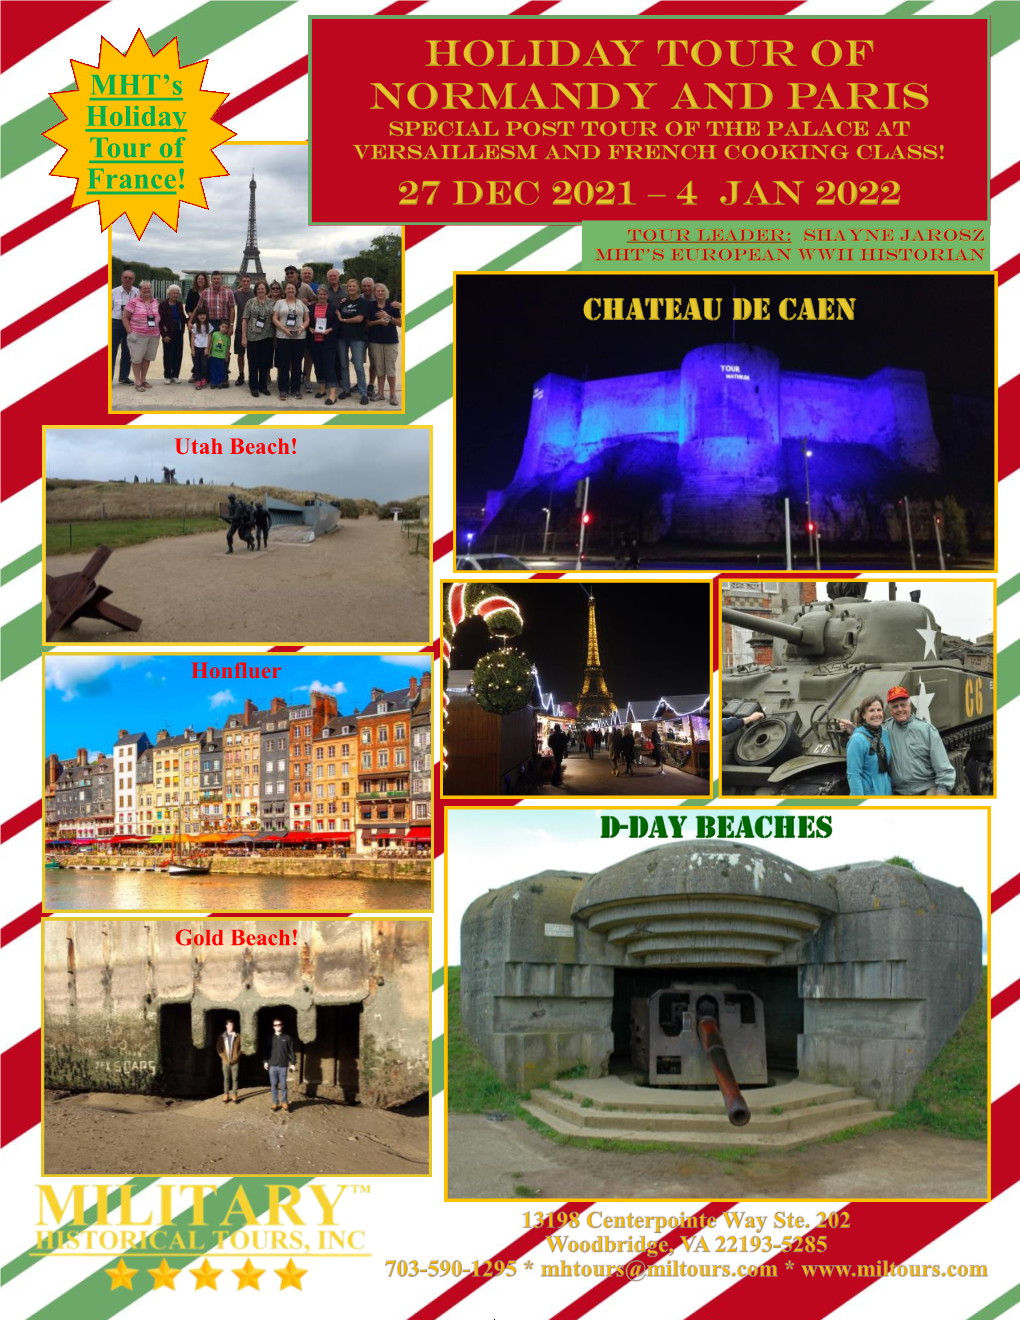 MHT's Holiday Tour of France!